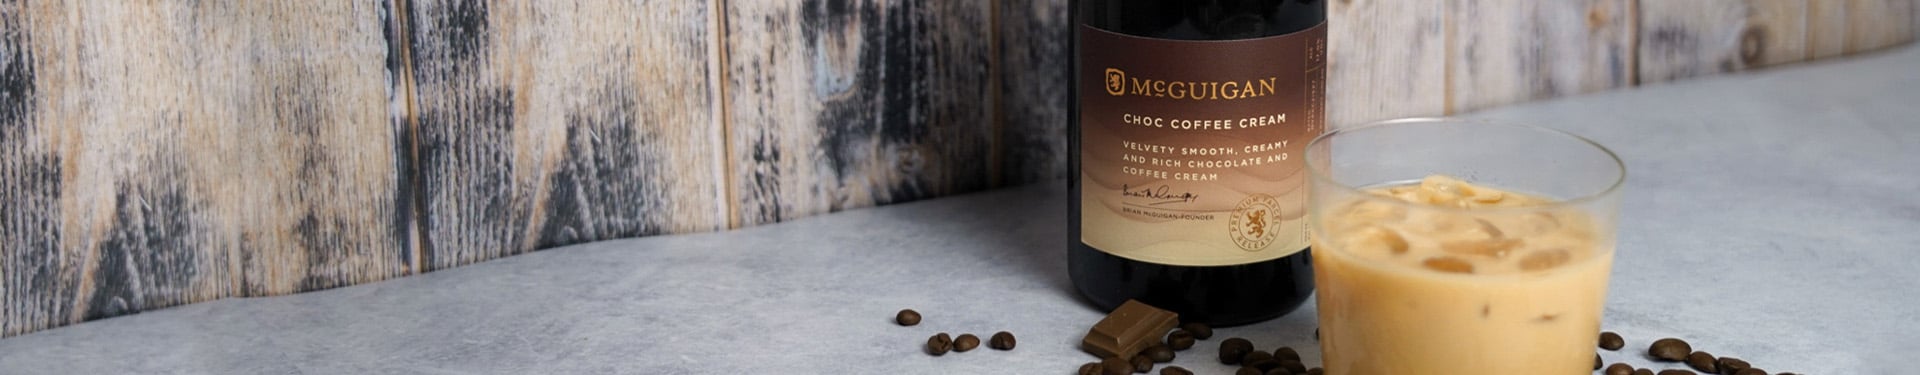 Bottle of and glass of McGuigan Choco Coffee Cream against a wooden wall